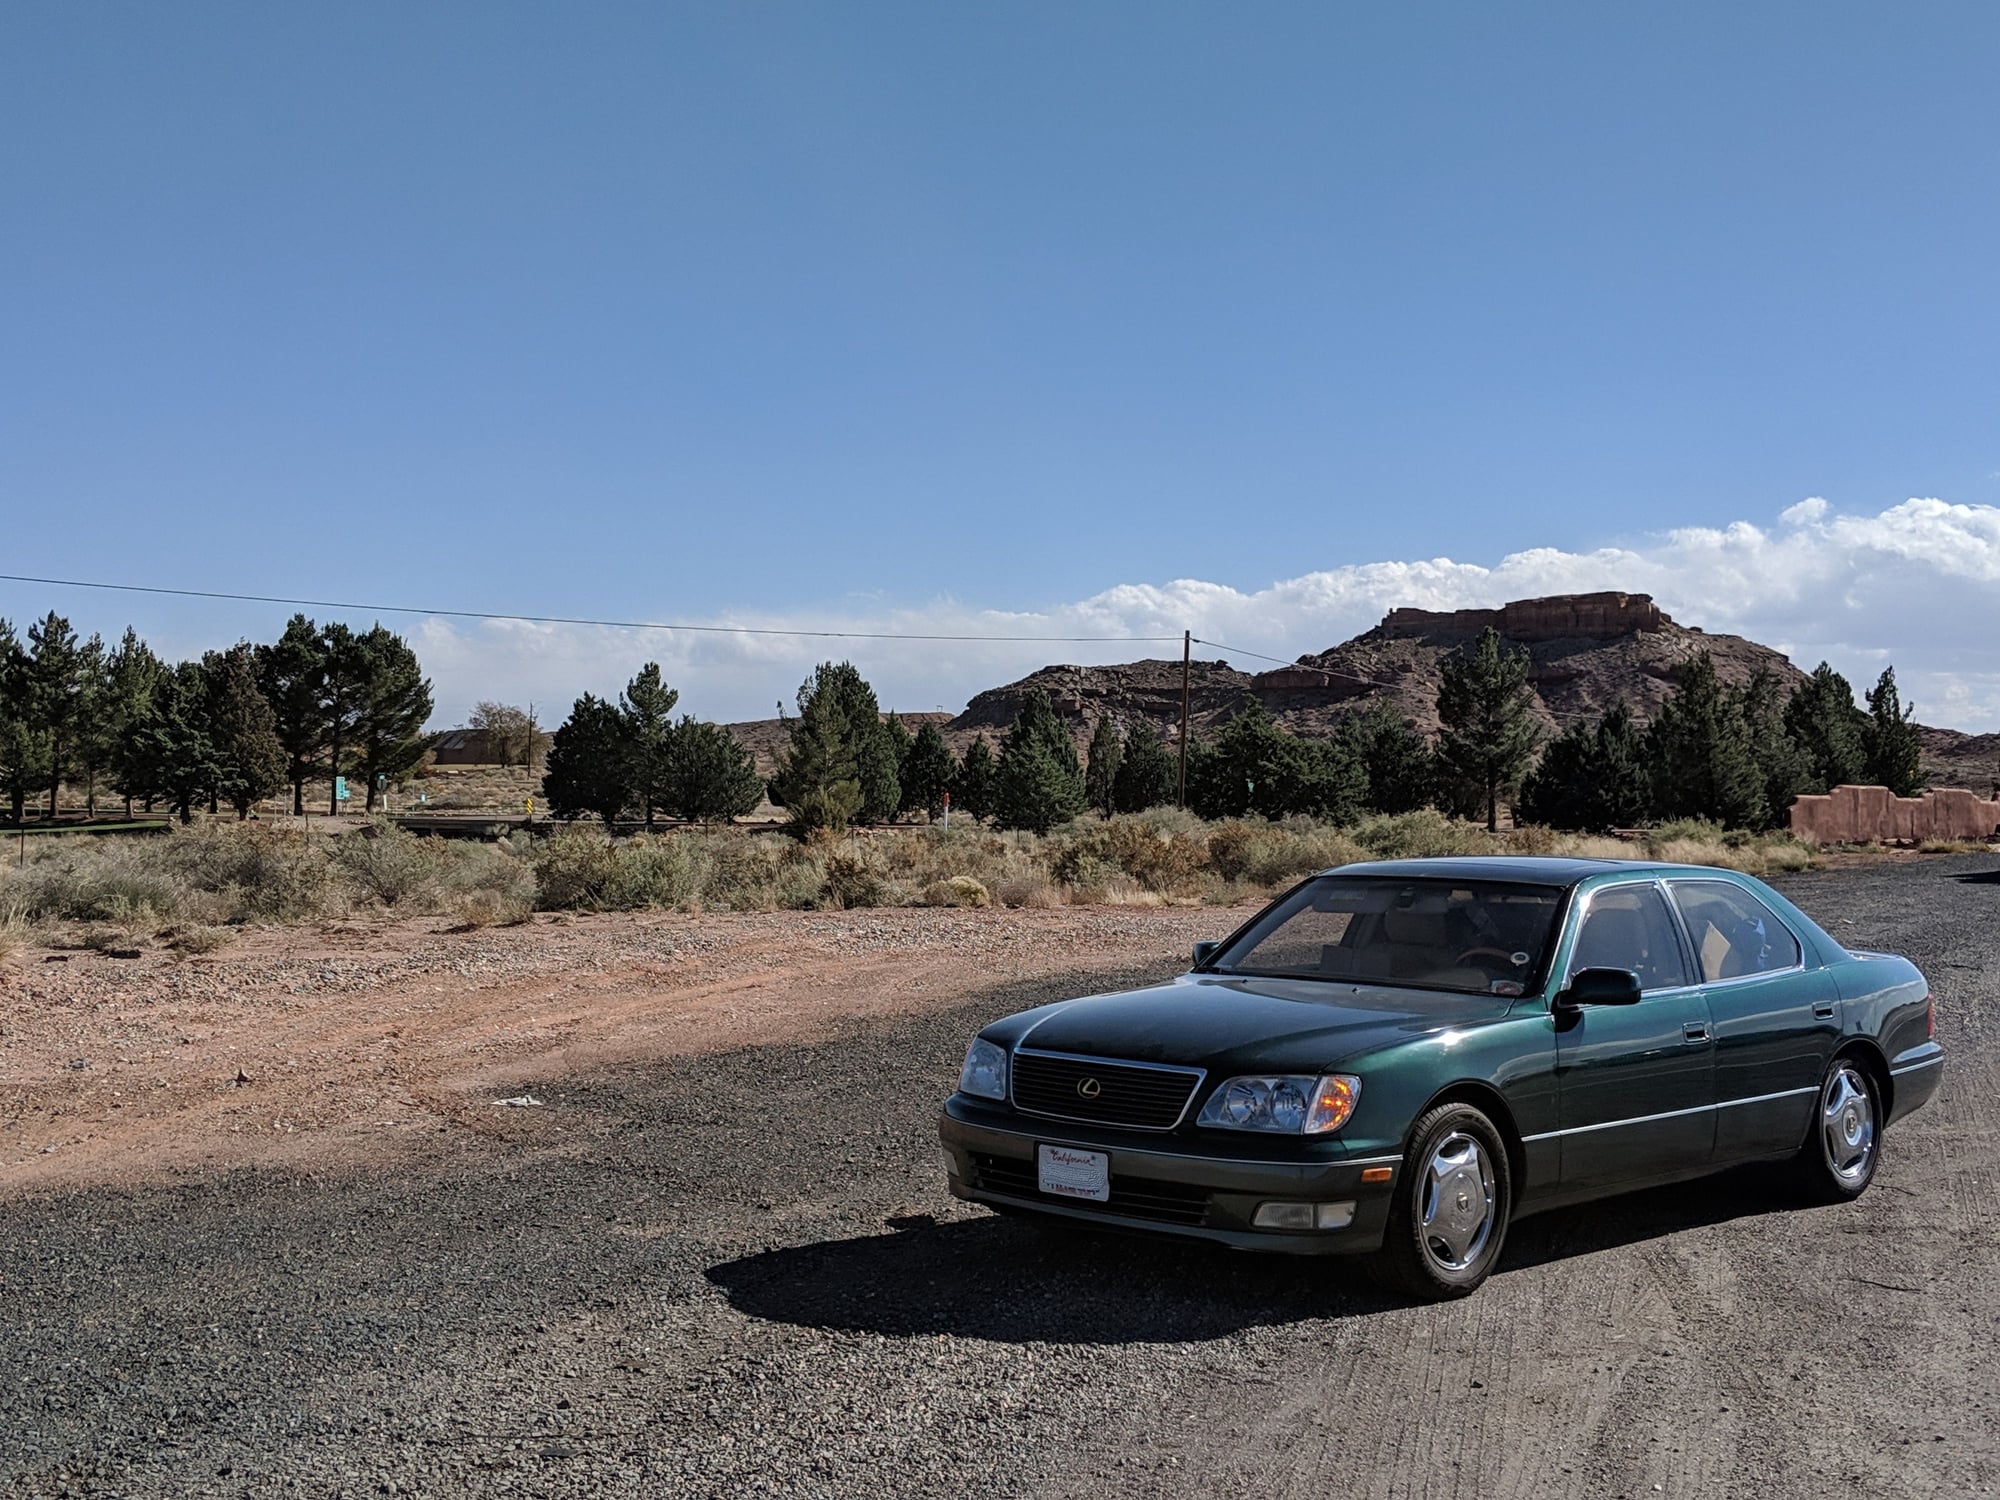 1998 Lexus LS400 - [NC/Raleigh] 1998 Lexus LS 400 - All Service Records and Mint Condition - California - Used - VIN JT8BH28F5W0117117 - 230,000 Miles - 8 cyl - 2WD - Automatic - Sedan - Other - Raleigh, NC 27606, United States